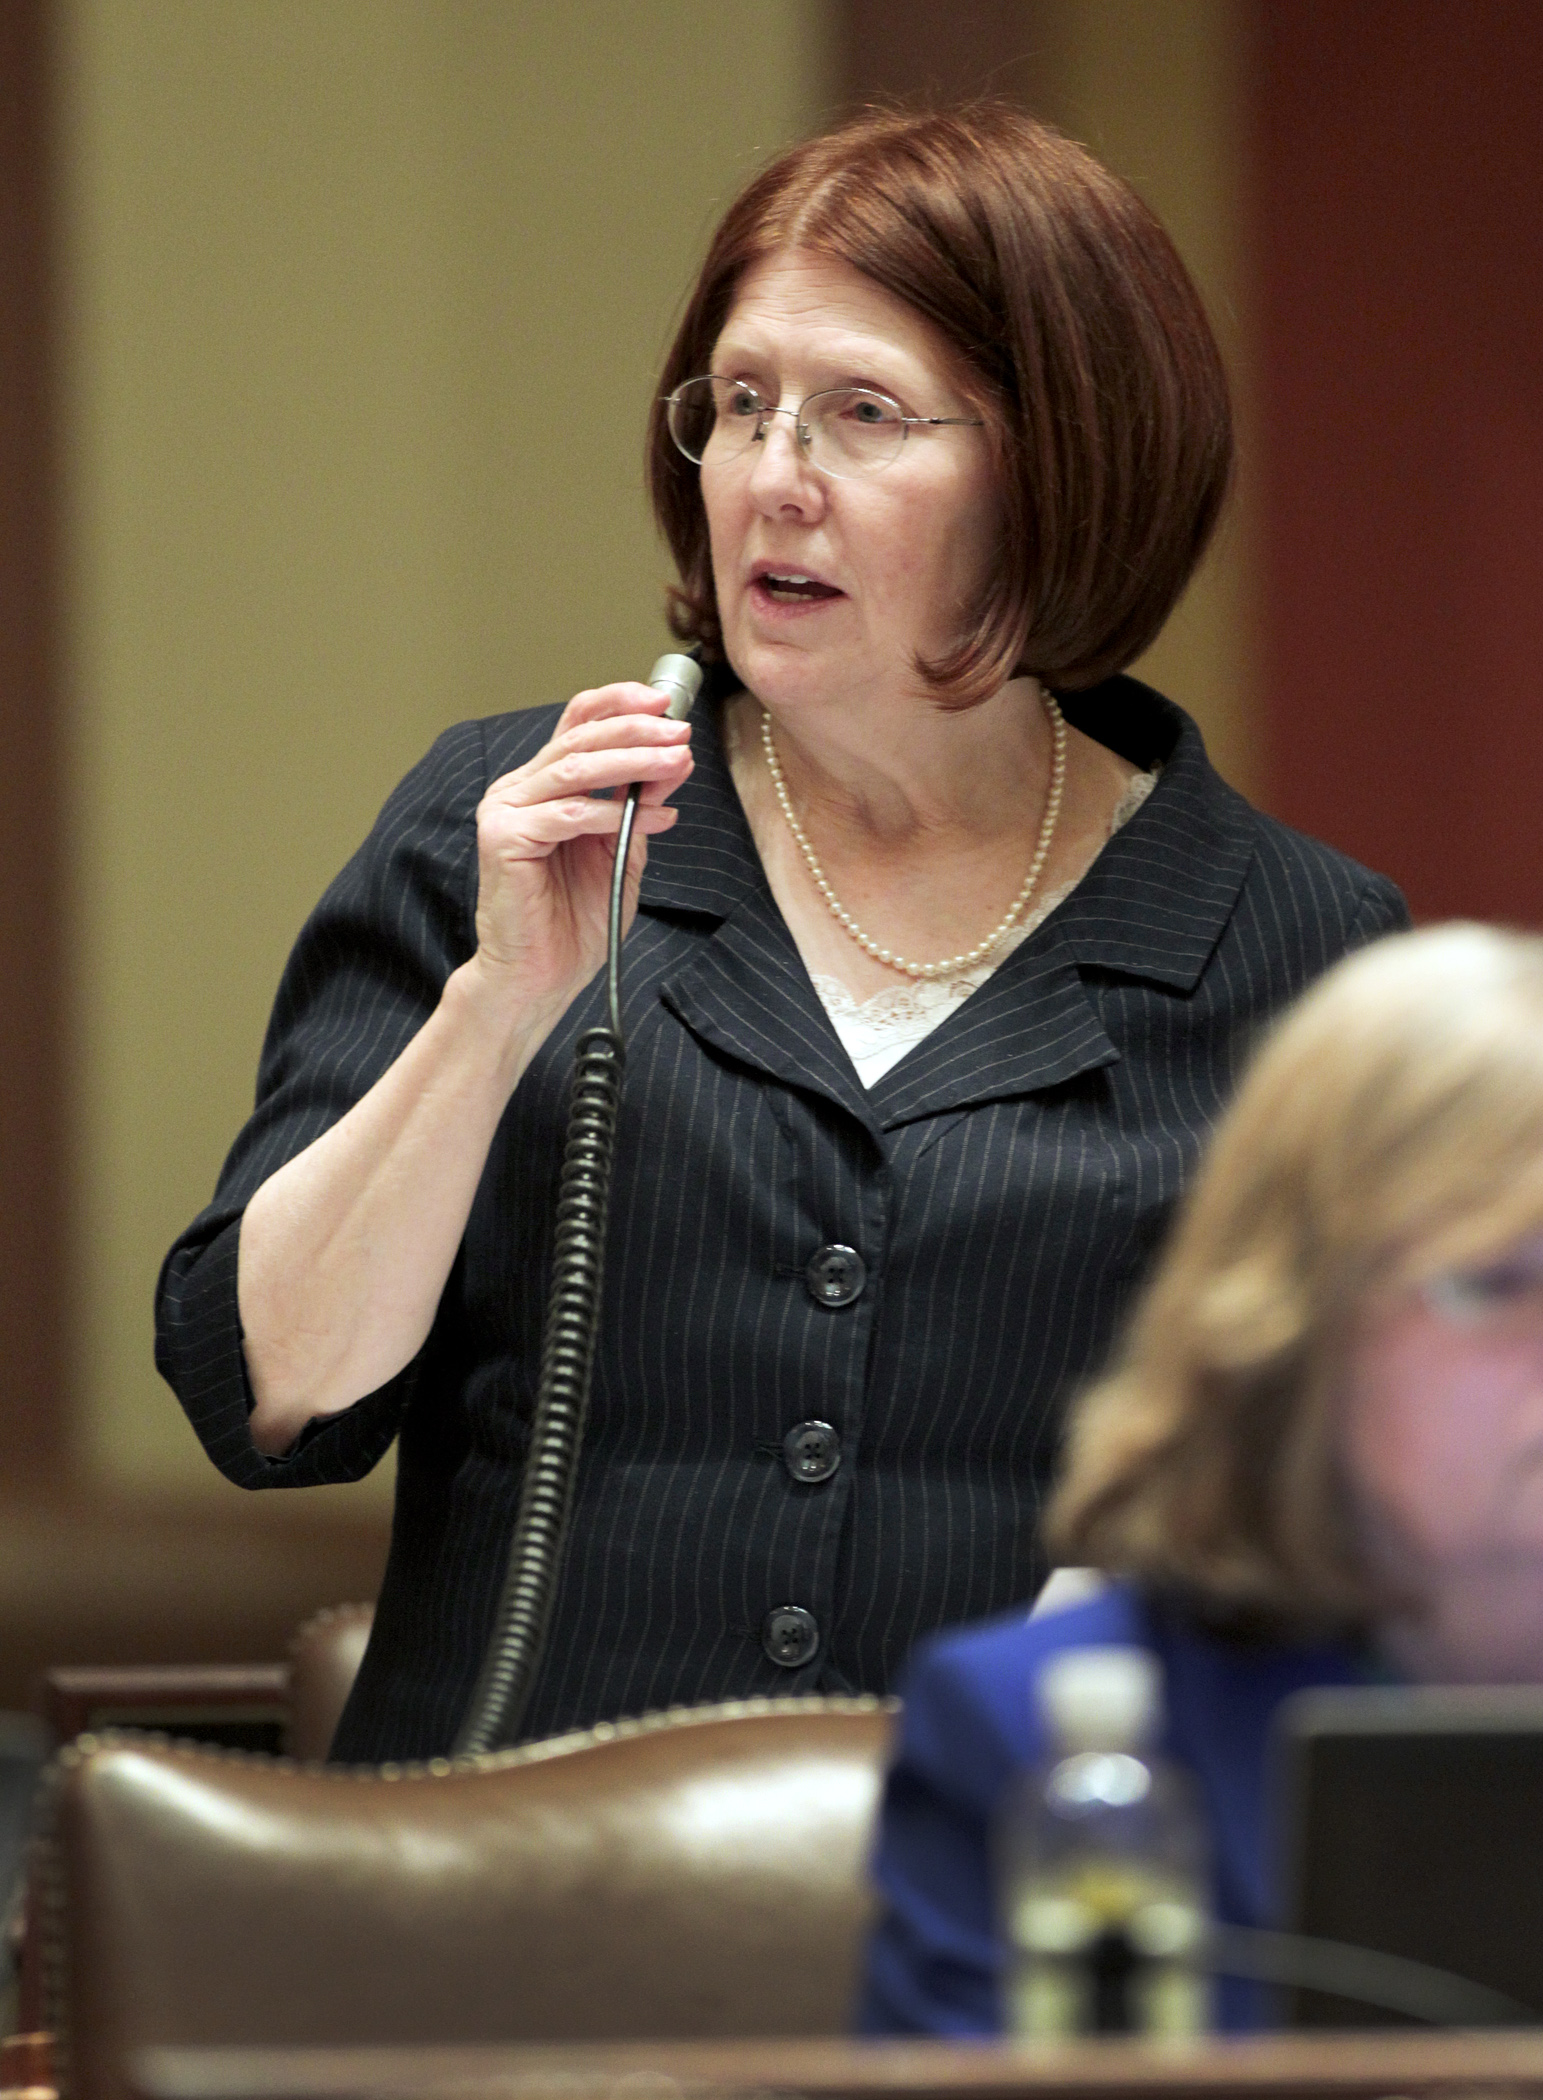 Rep. Tina Liebling responds to a member’s amendment during floor debate on her bill, HF2402, the omnibus health and human services policy bill May 5. Photo by Paul Battaglia